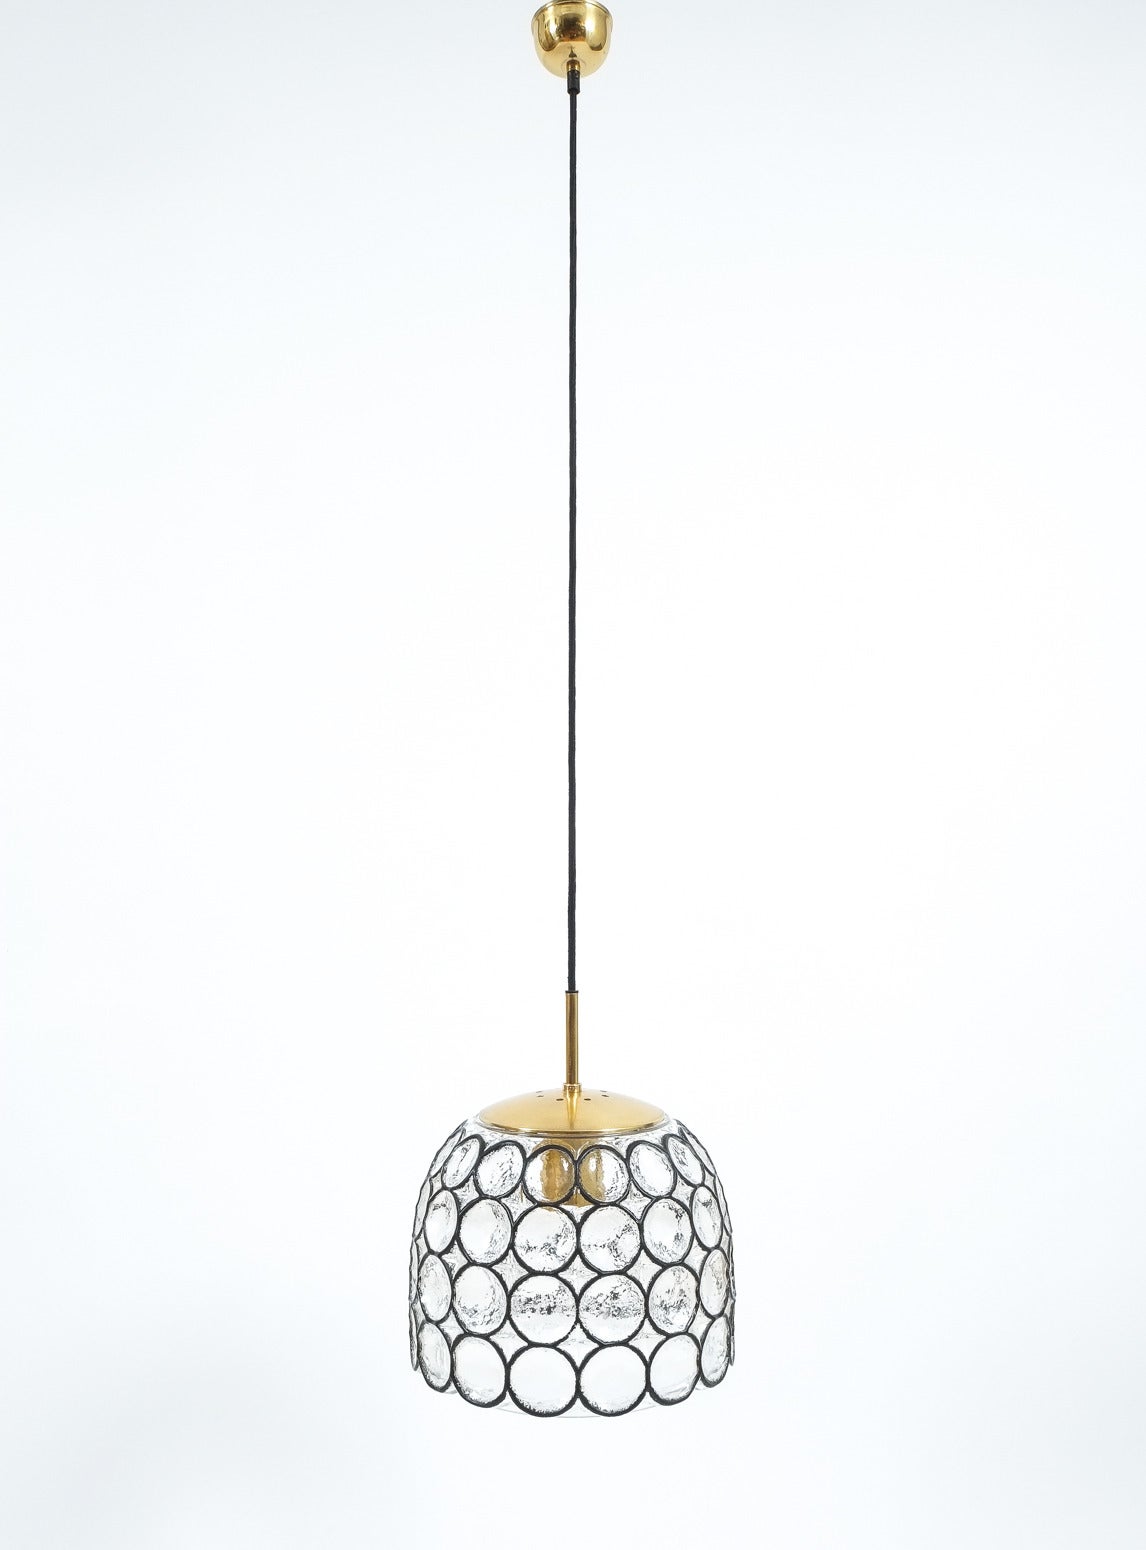 Beautiful pair of 'iron' and glass bell-shaped pendants by Limburg, Germany. The fixtures feature a concave thick clear glass shade with circle 'iron' elements. The hardware is made from brass, holding a single large bulb (100W max). The condition